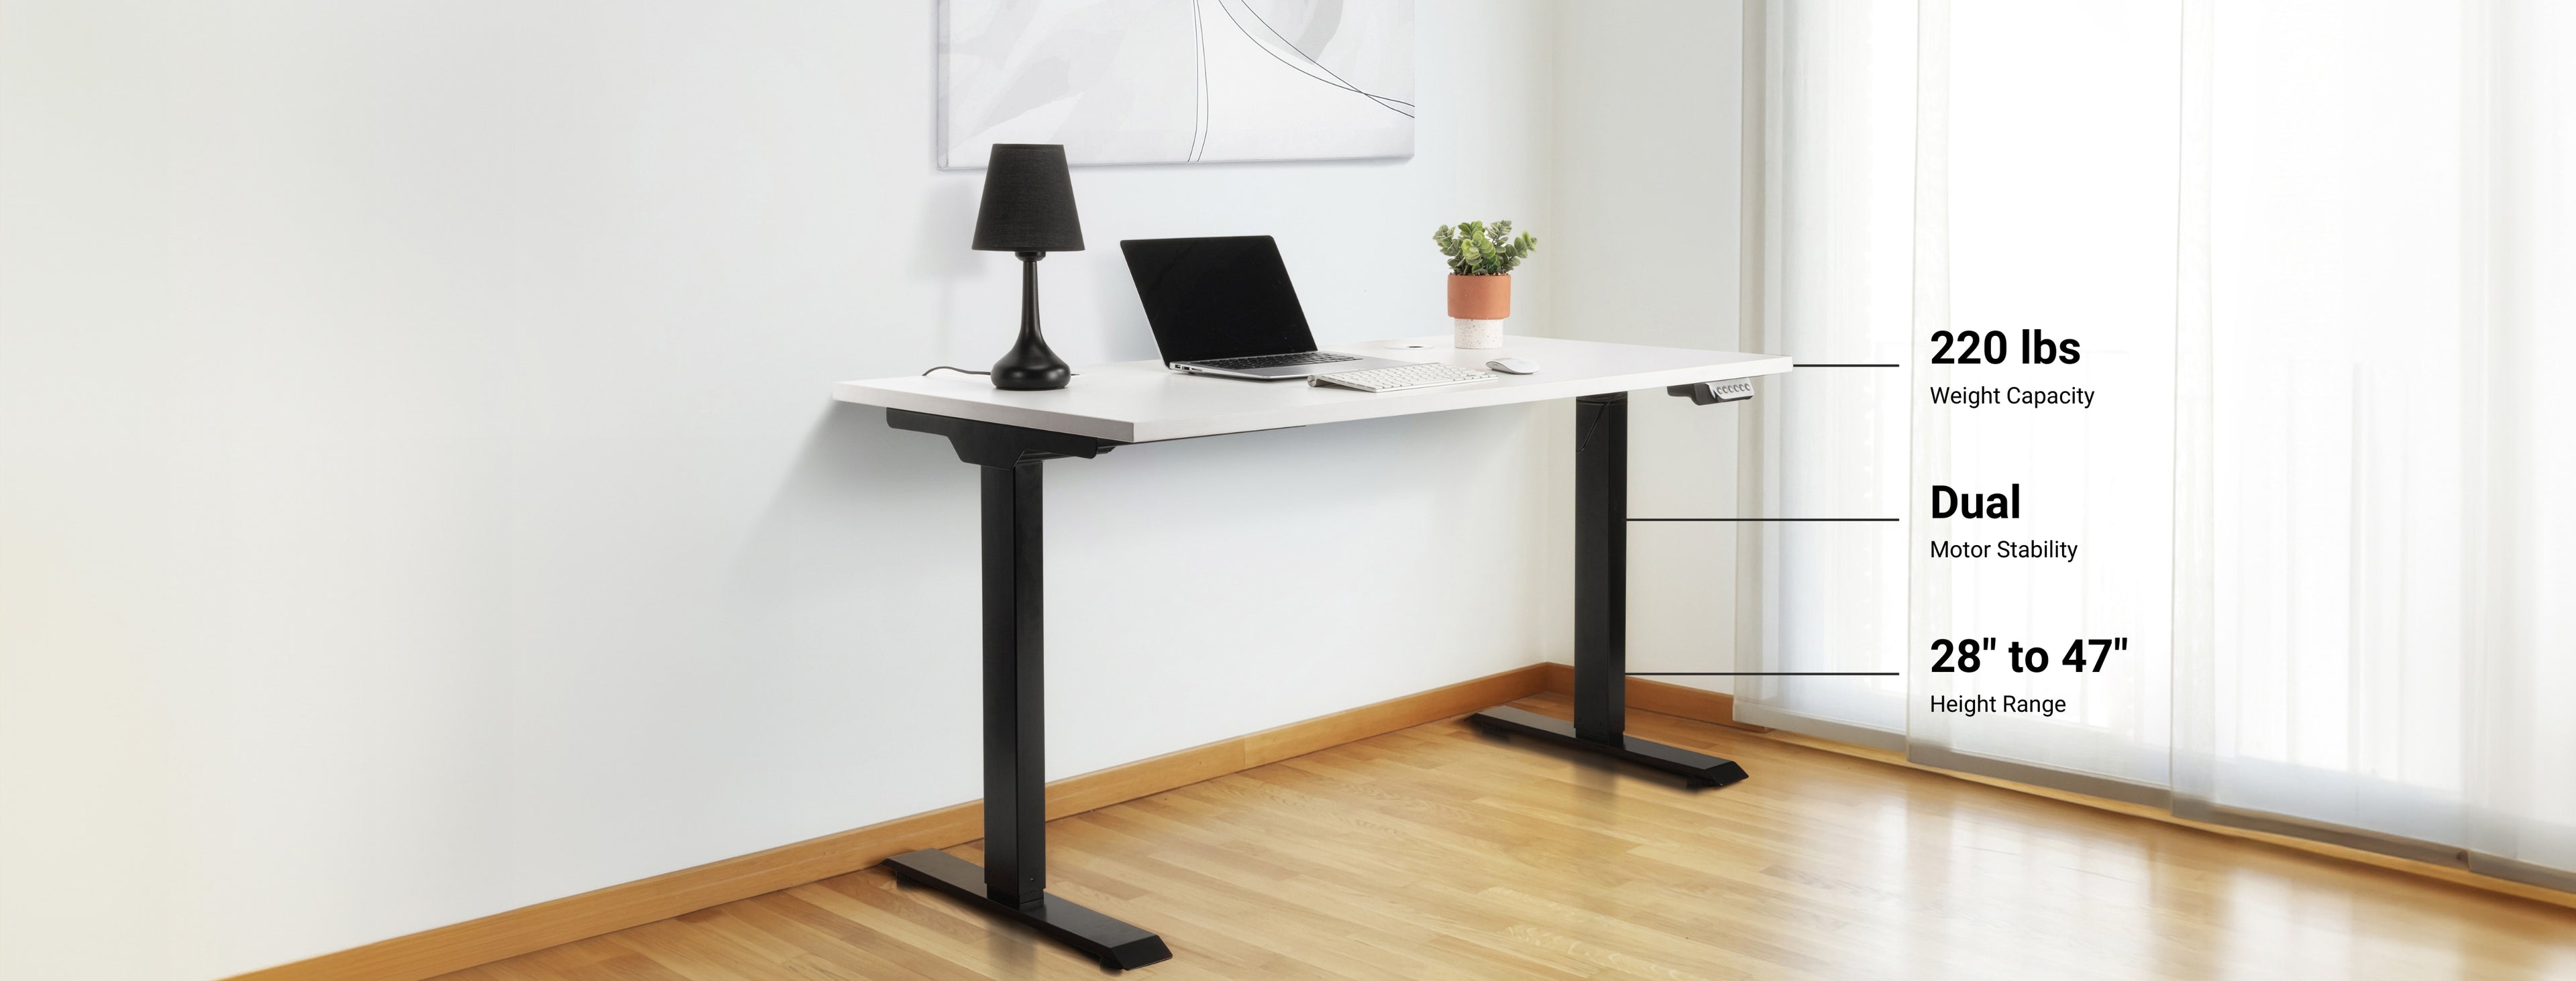 The Ergonomic Benefits of Variable-Height Workstations - Blog